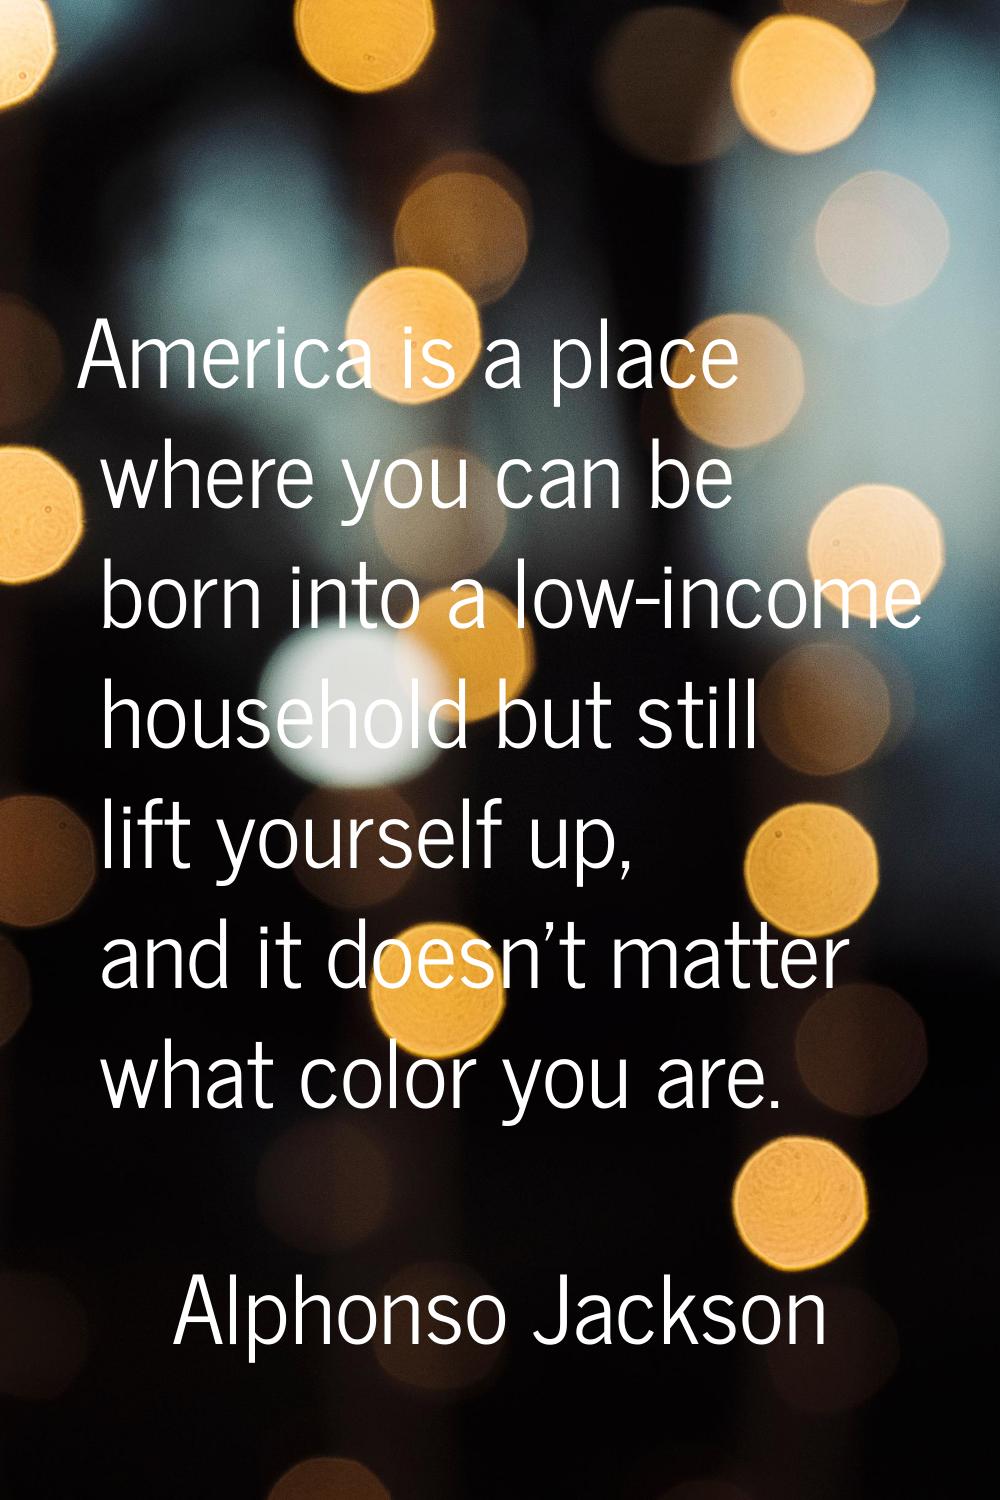 America is a place where you can be born into a low-income household but still lift yourself up, an